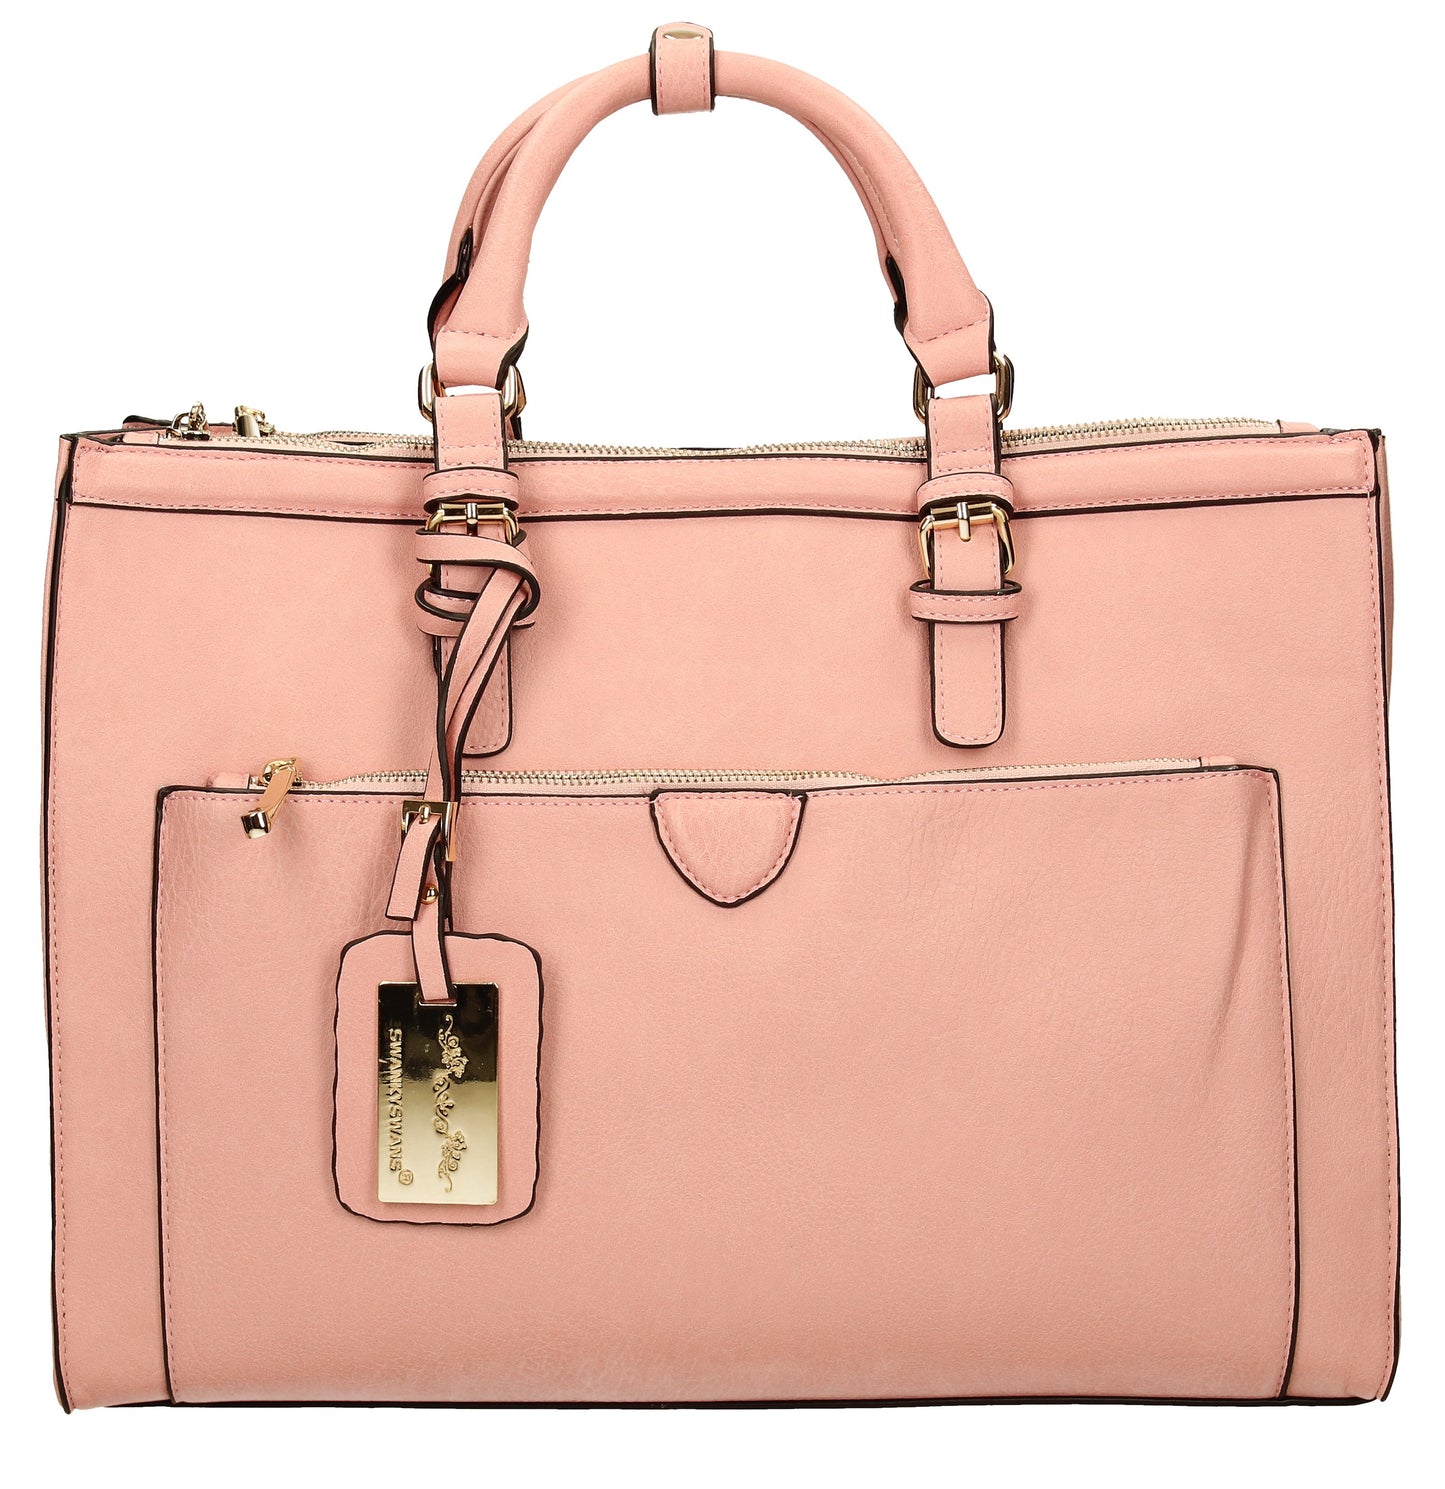 Swanky Swans Marcella Cosmo Handbag PinkPerfect for School, Weddings, Day out!